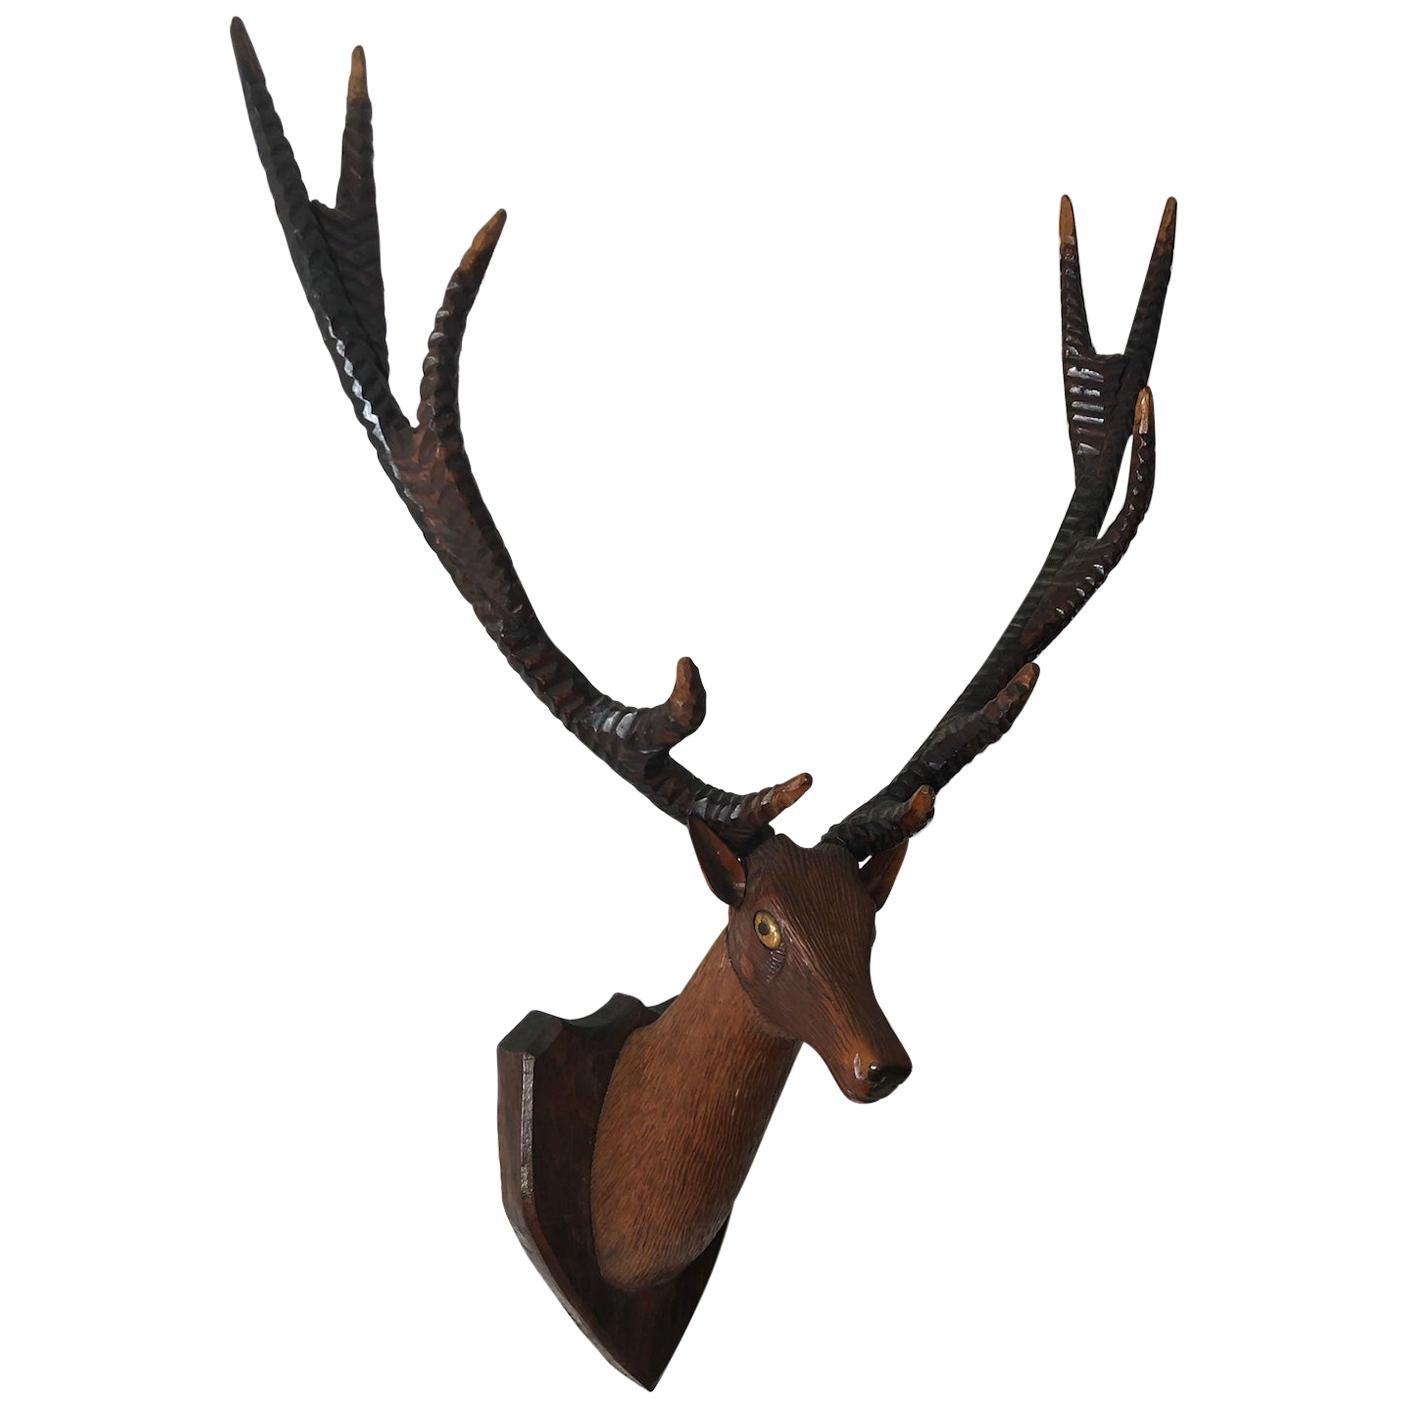 Black Forest Carved Deer or Stag Head and Antlers on Plaque, Germany, 1900